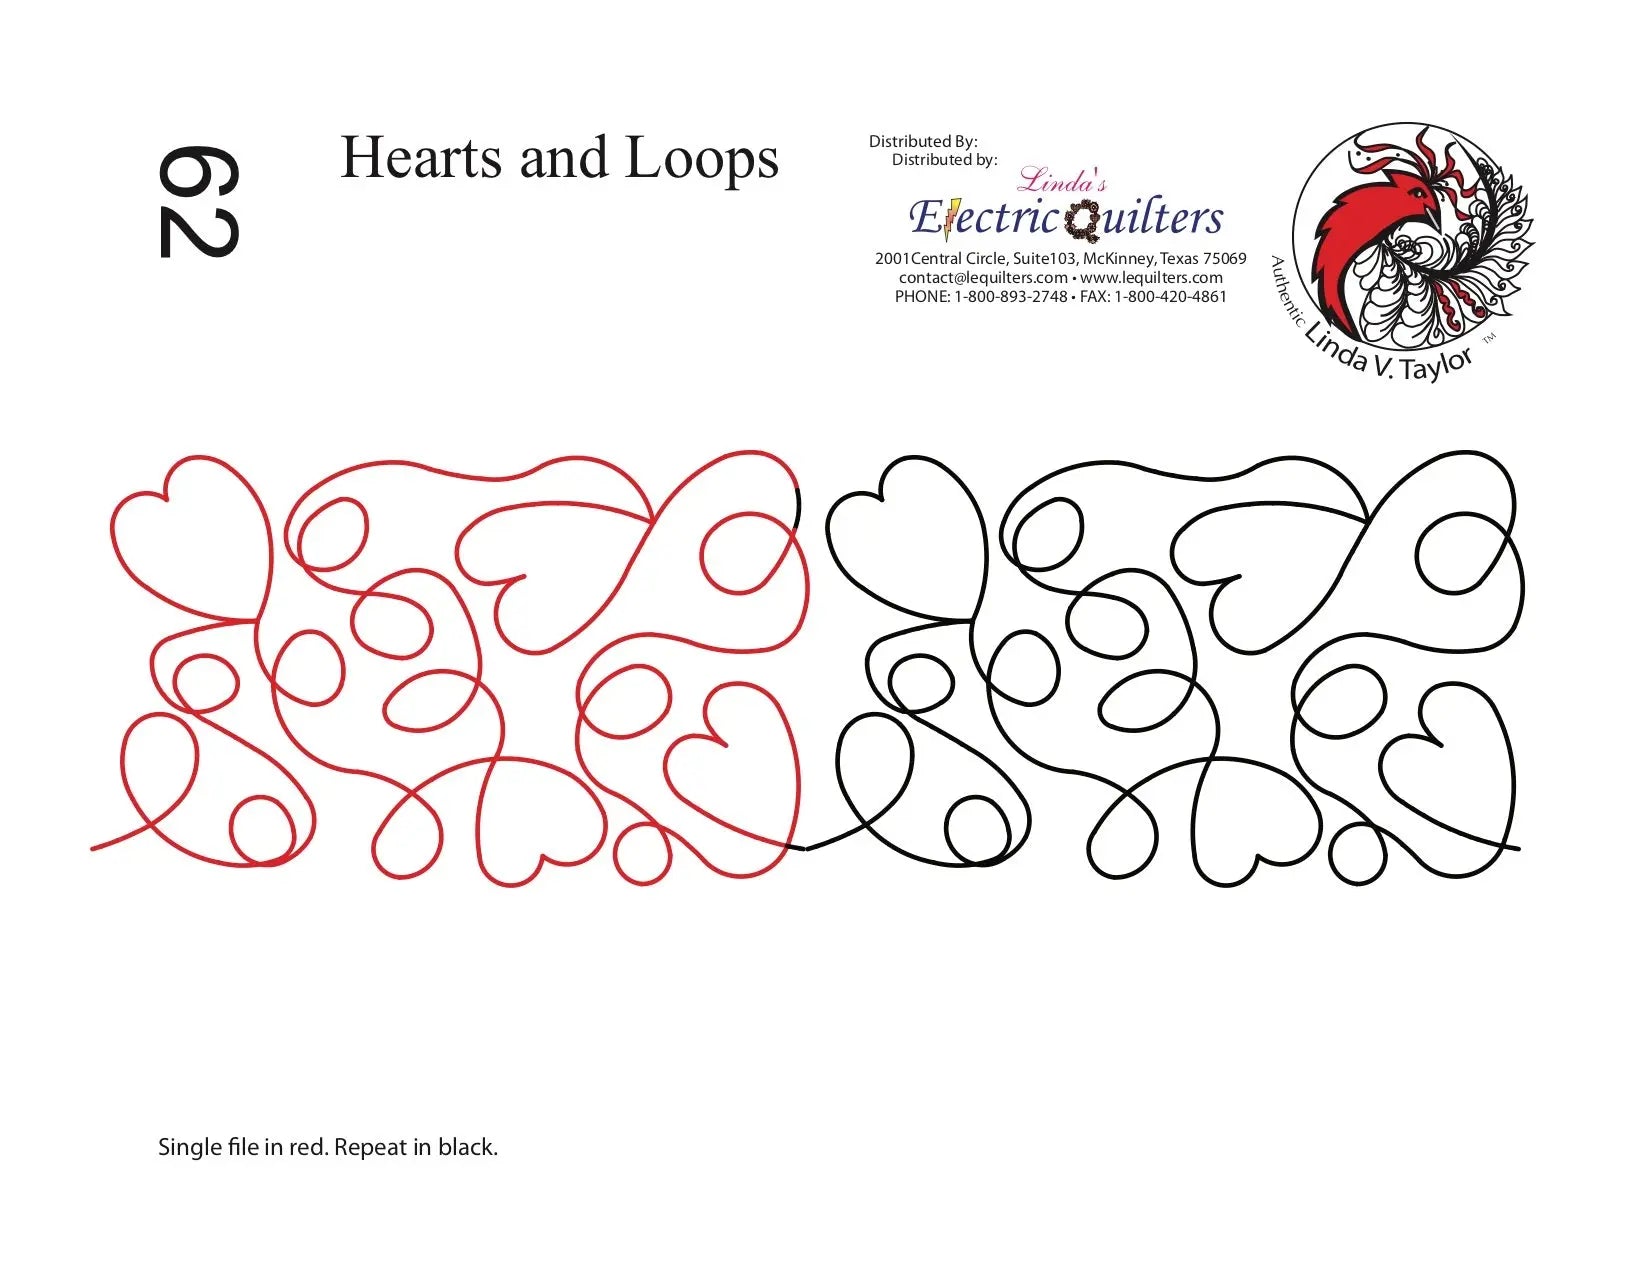 062 Hearts And Loops Pantograph by Linda V. Taylor - Linda's Electric Quilters